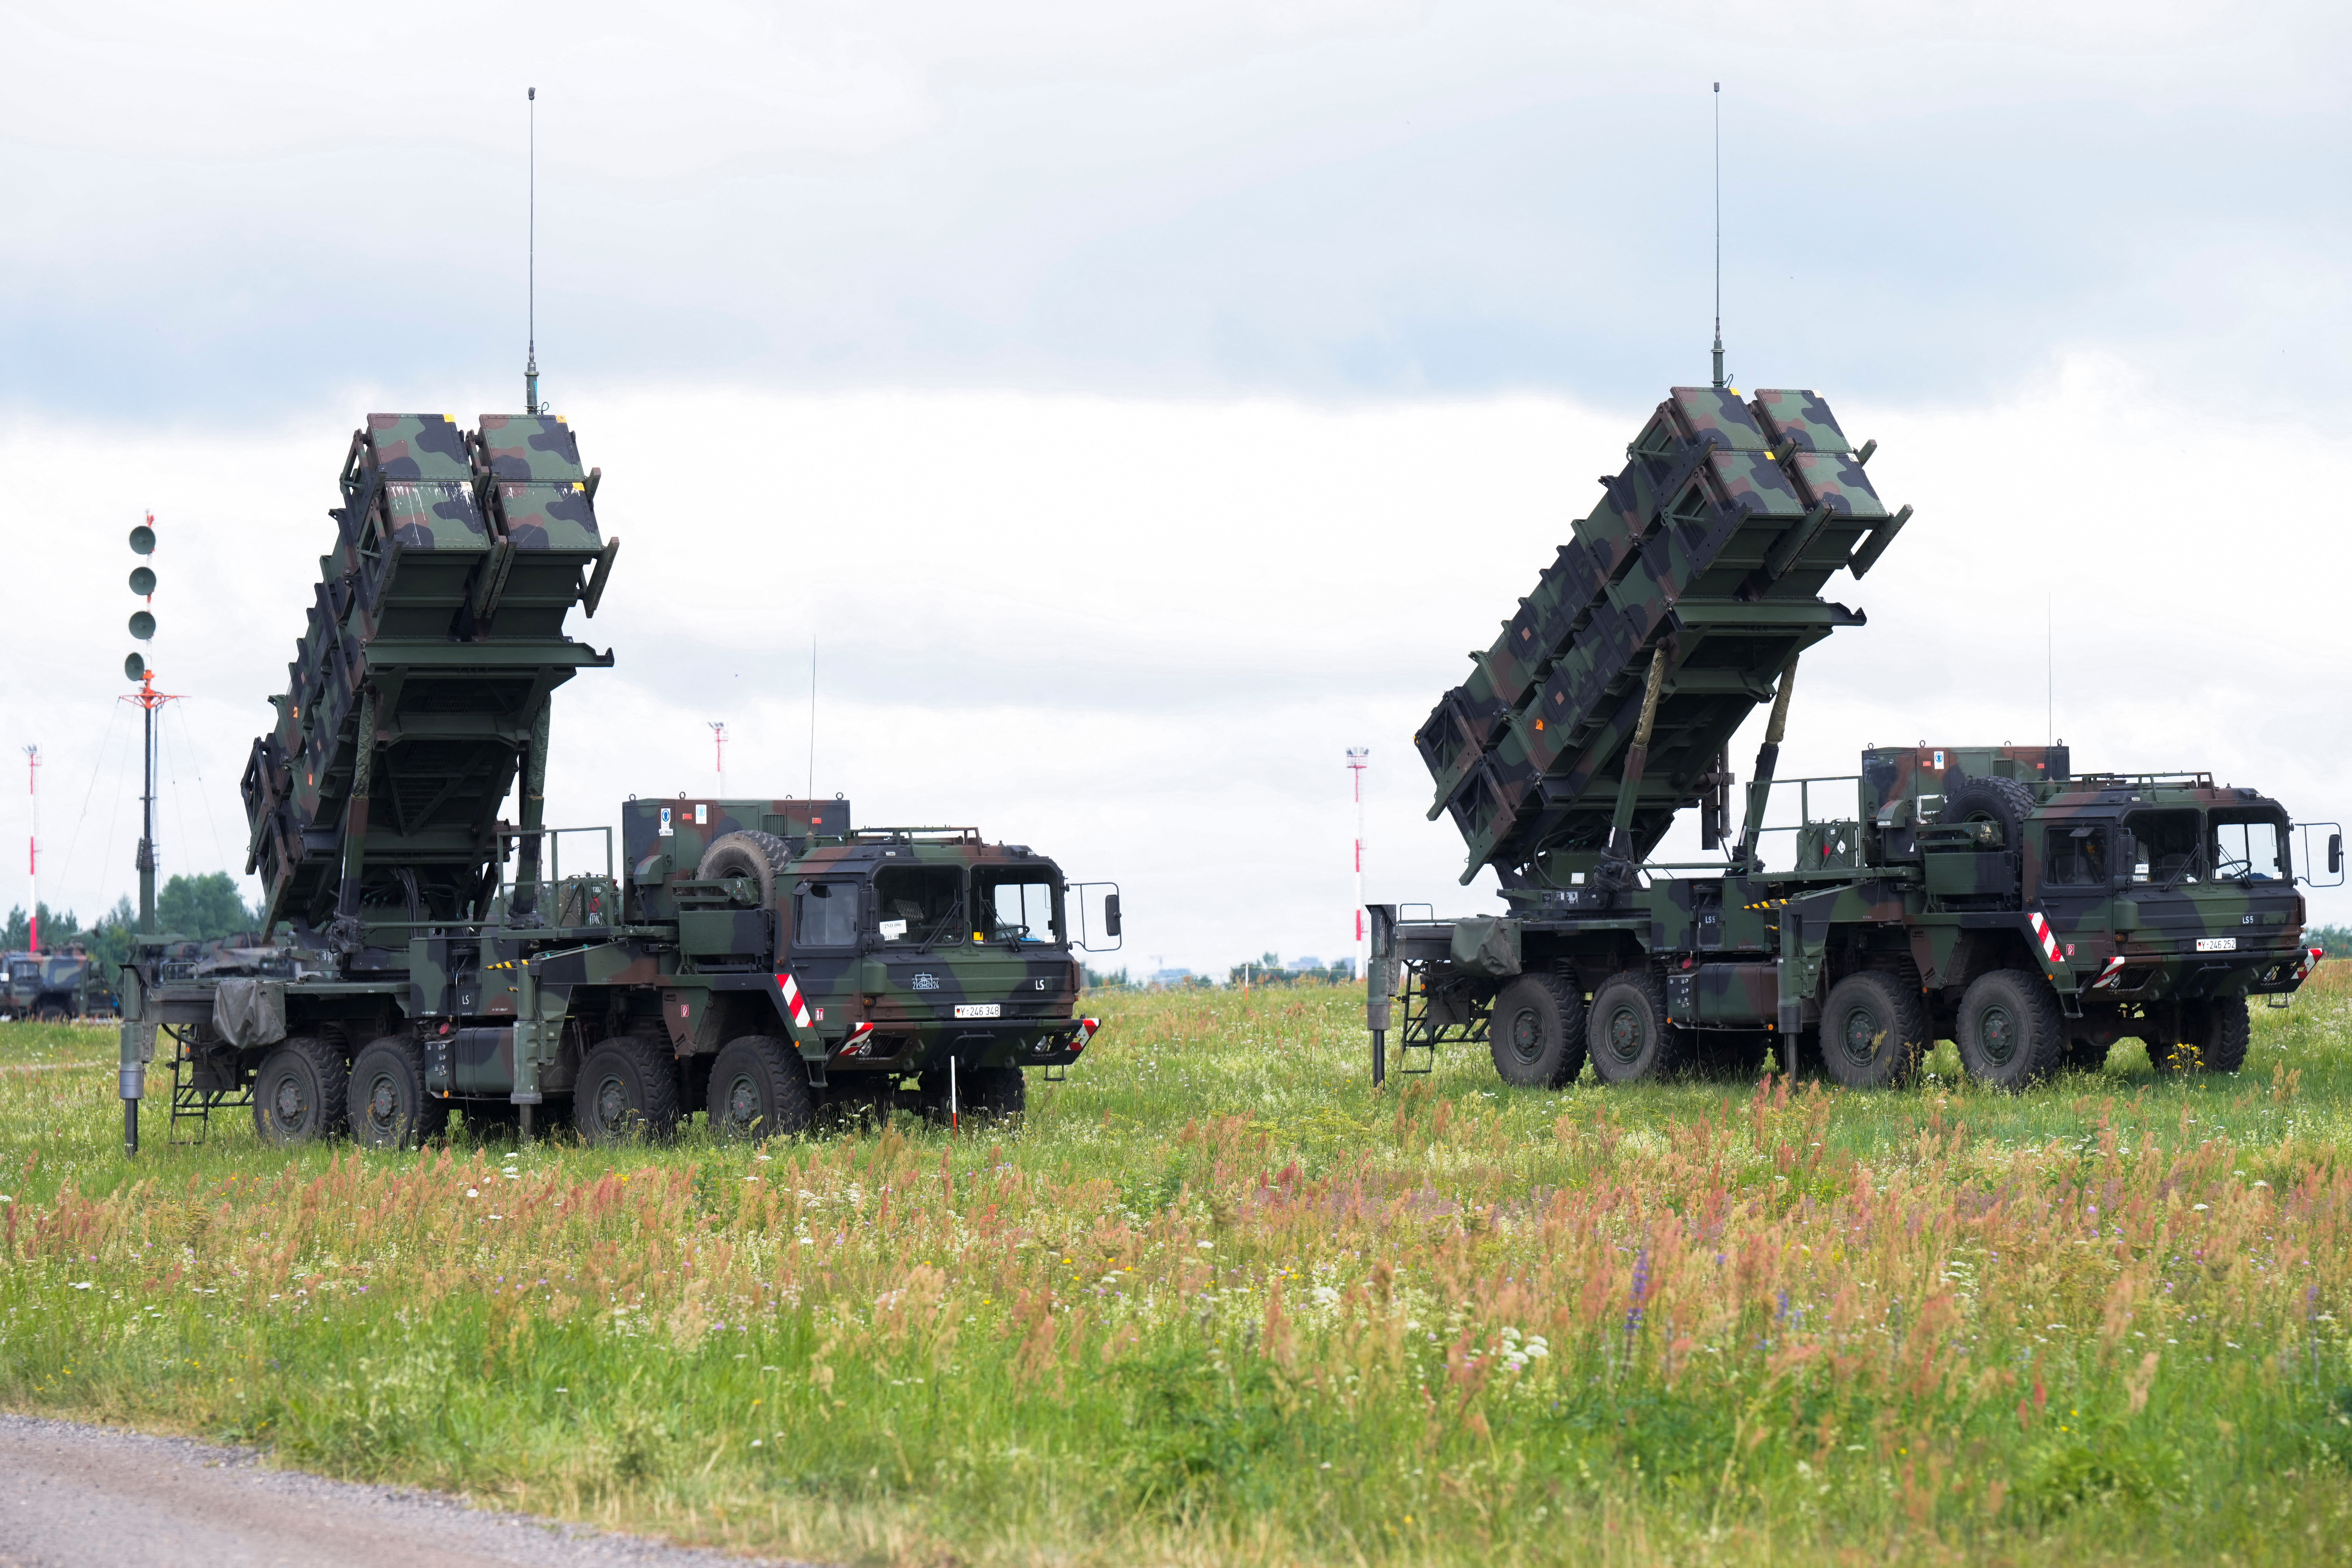 German Patriot air defence system units are deployed at Vilnius airport